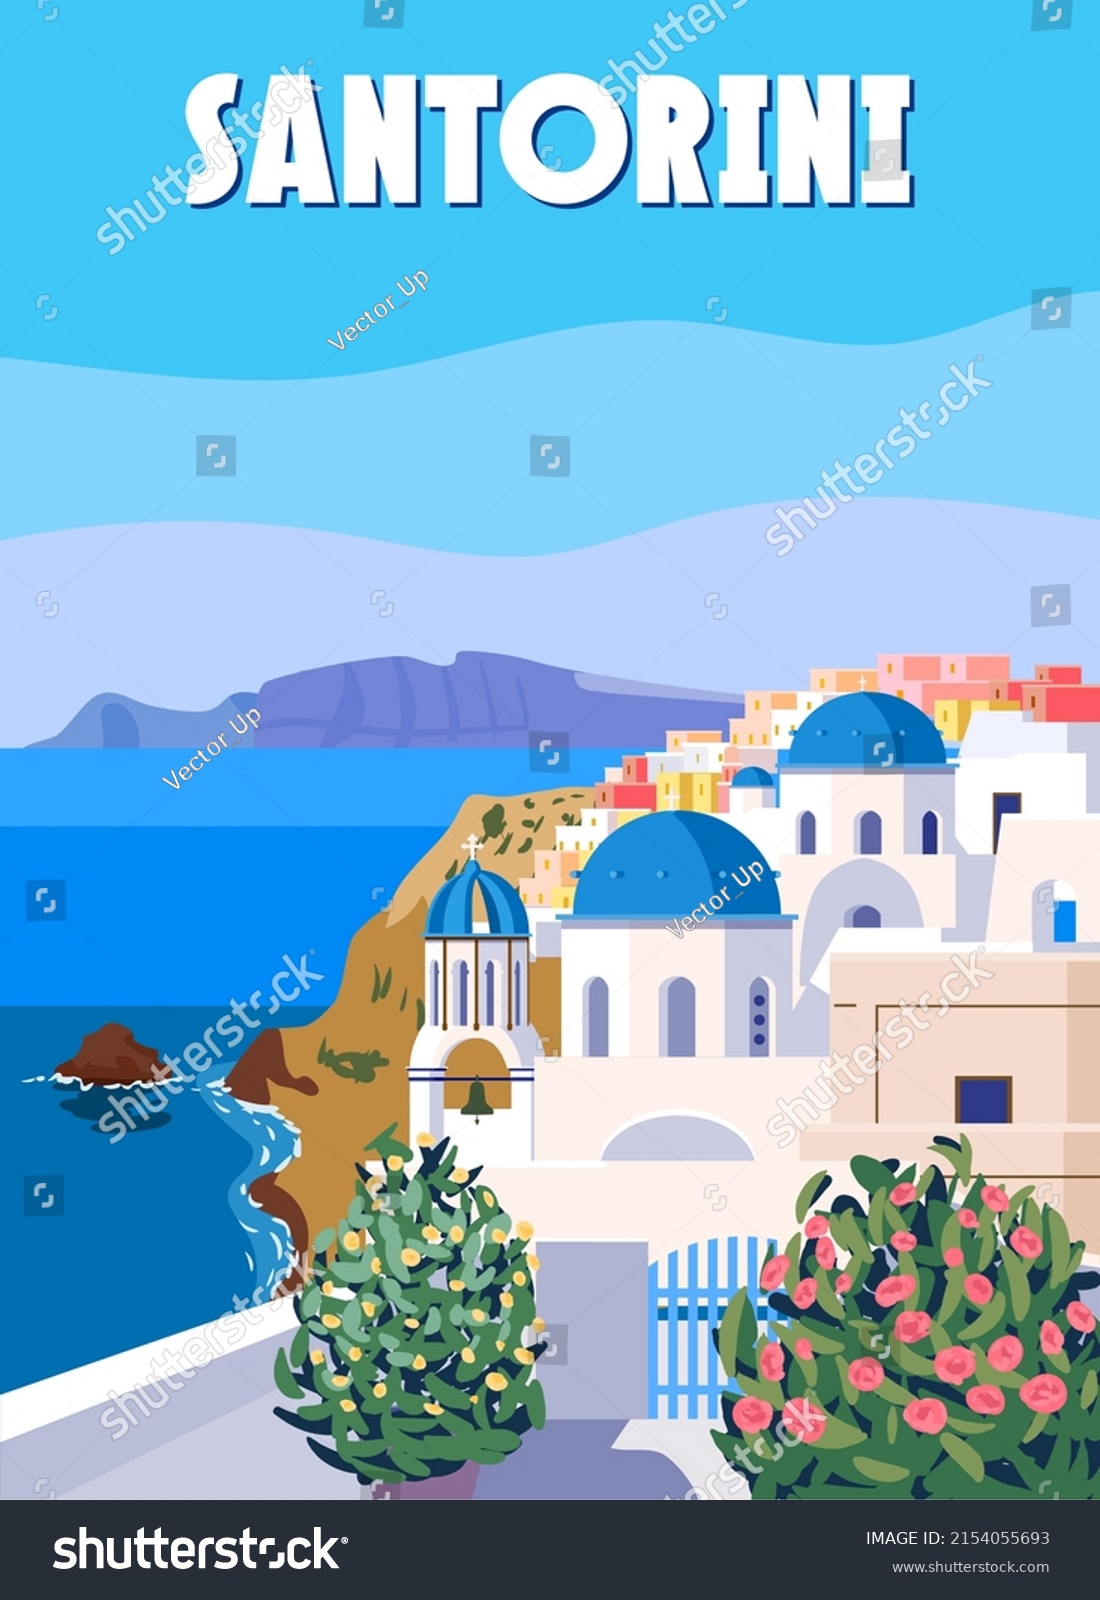 SVG of Greece Santorini Poster Travel, Greek white buildings with blue roofs, church, poster, old Mediterranean European culture and architecture svg